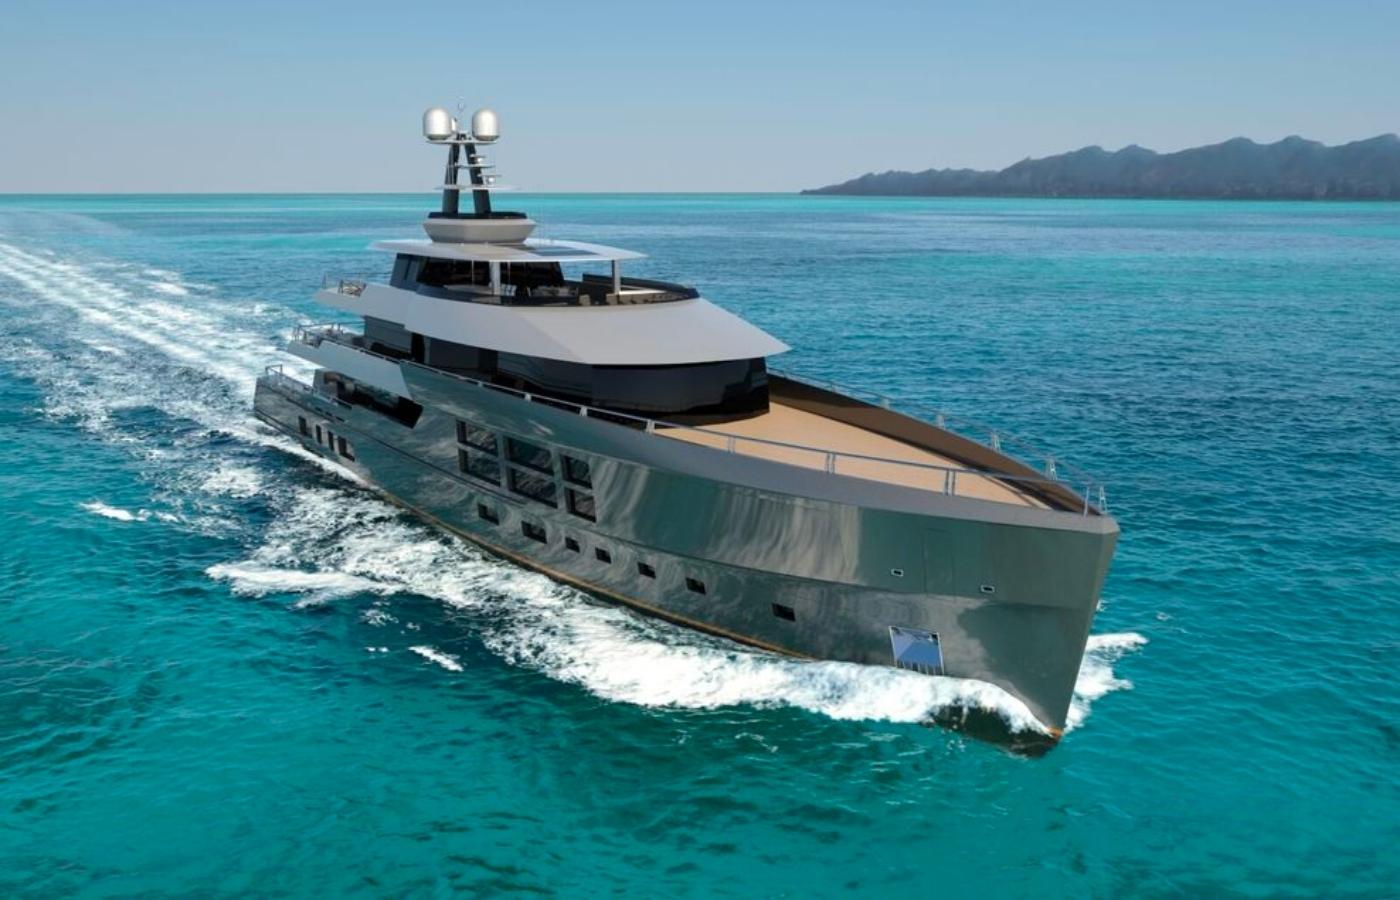 Cloud Yachts Releases NFT for the Miami Boat Show [In the News]